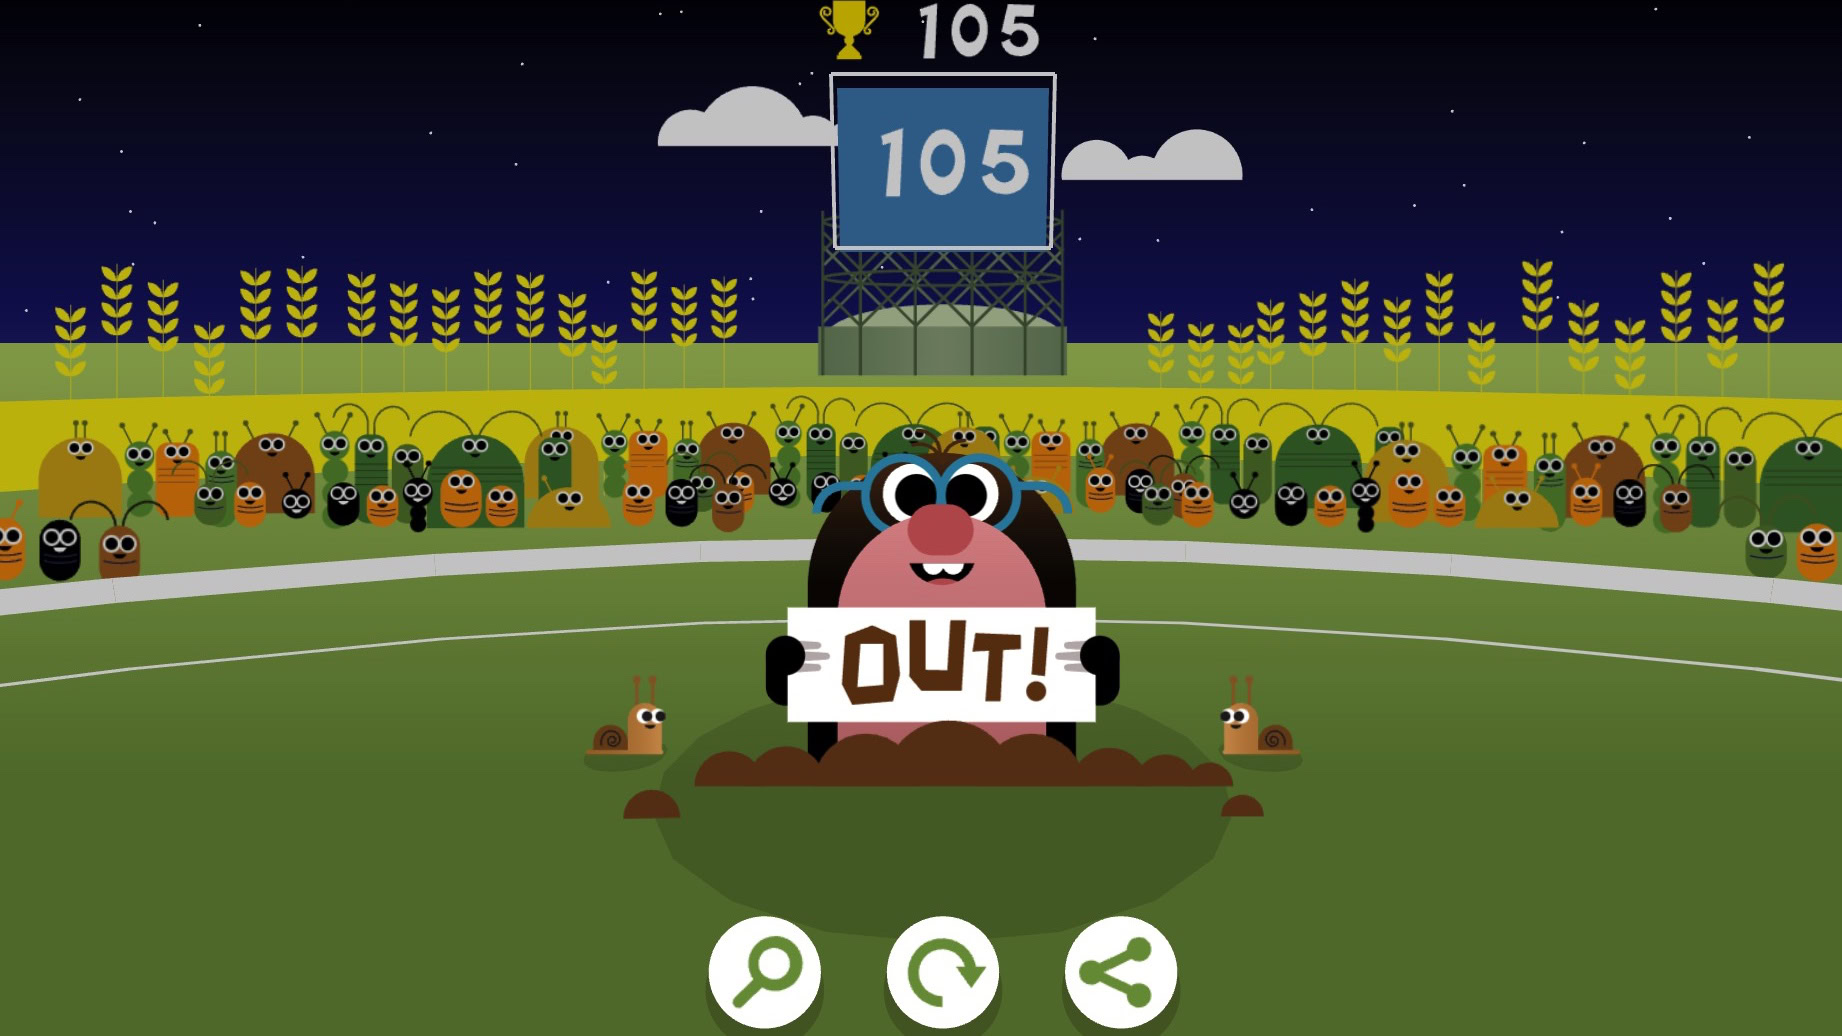 The Google Doodle is a baseball game